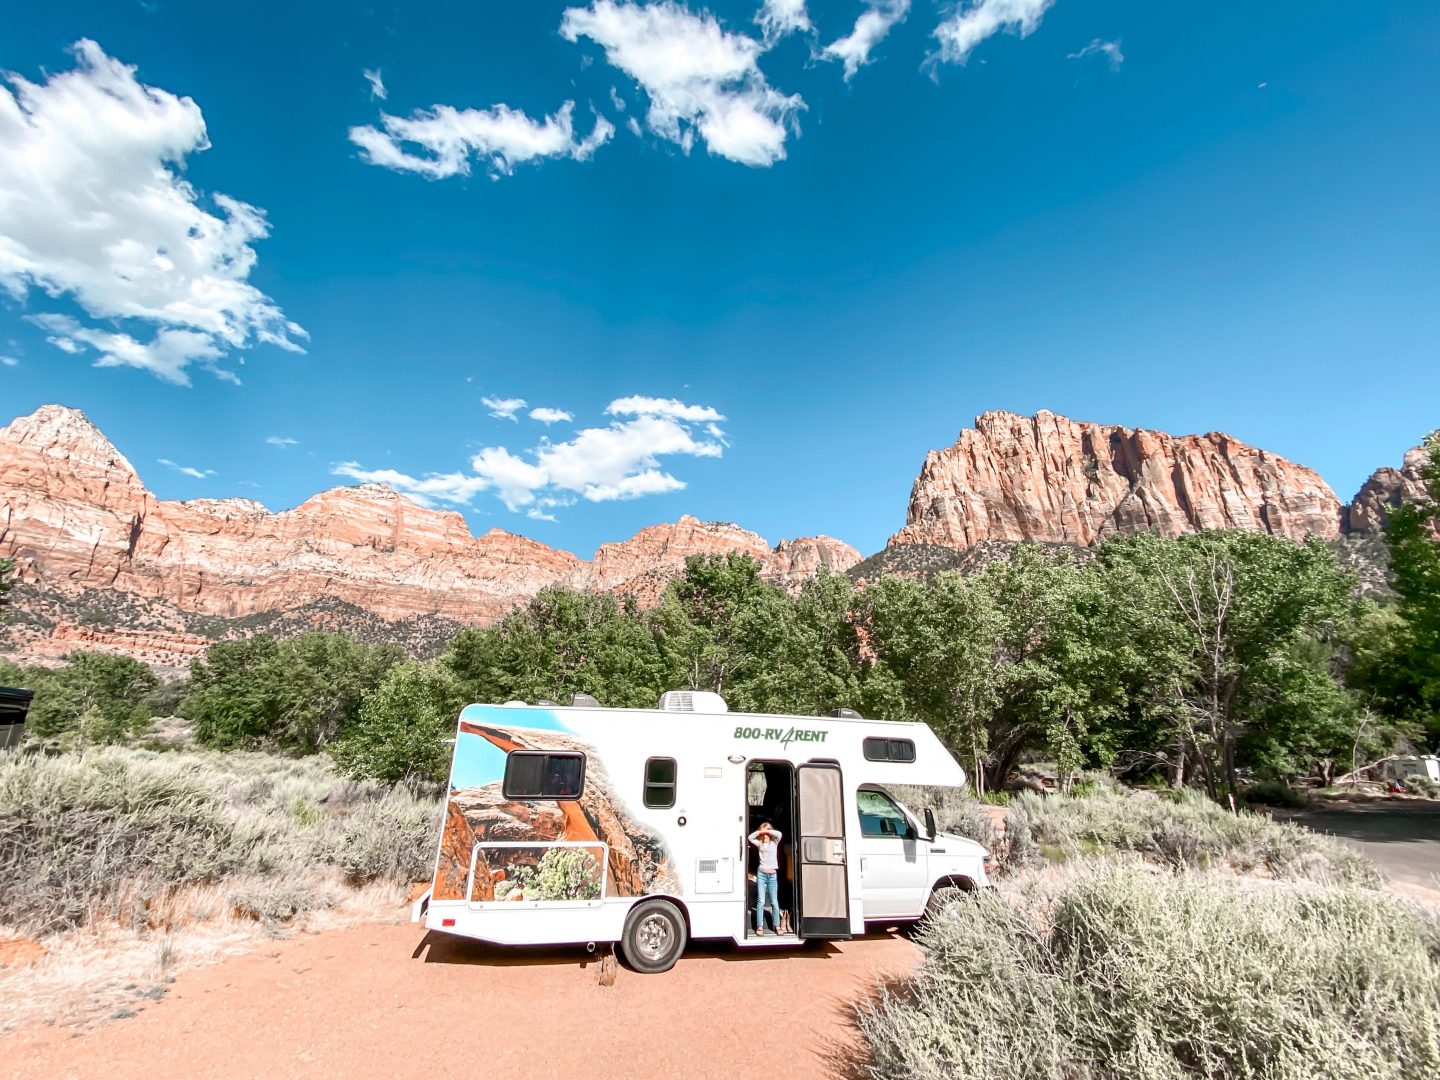 10 Pros & Cons of RV Travel